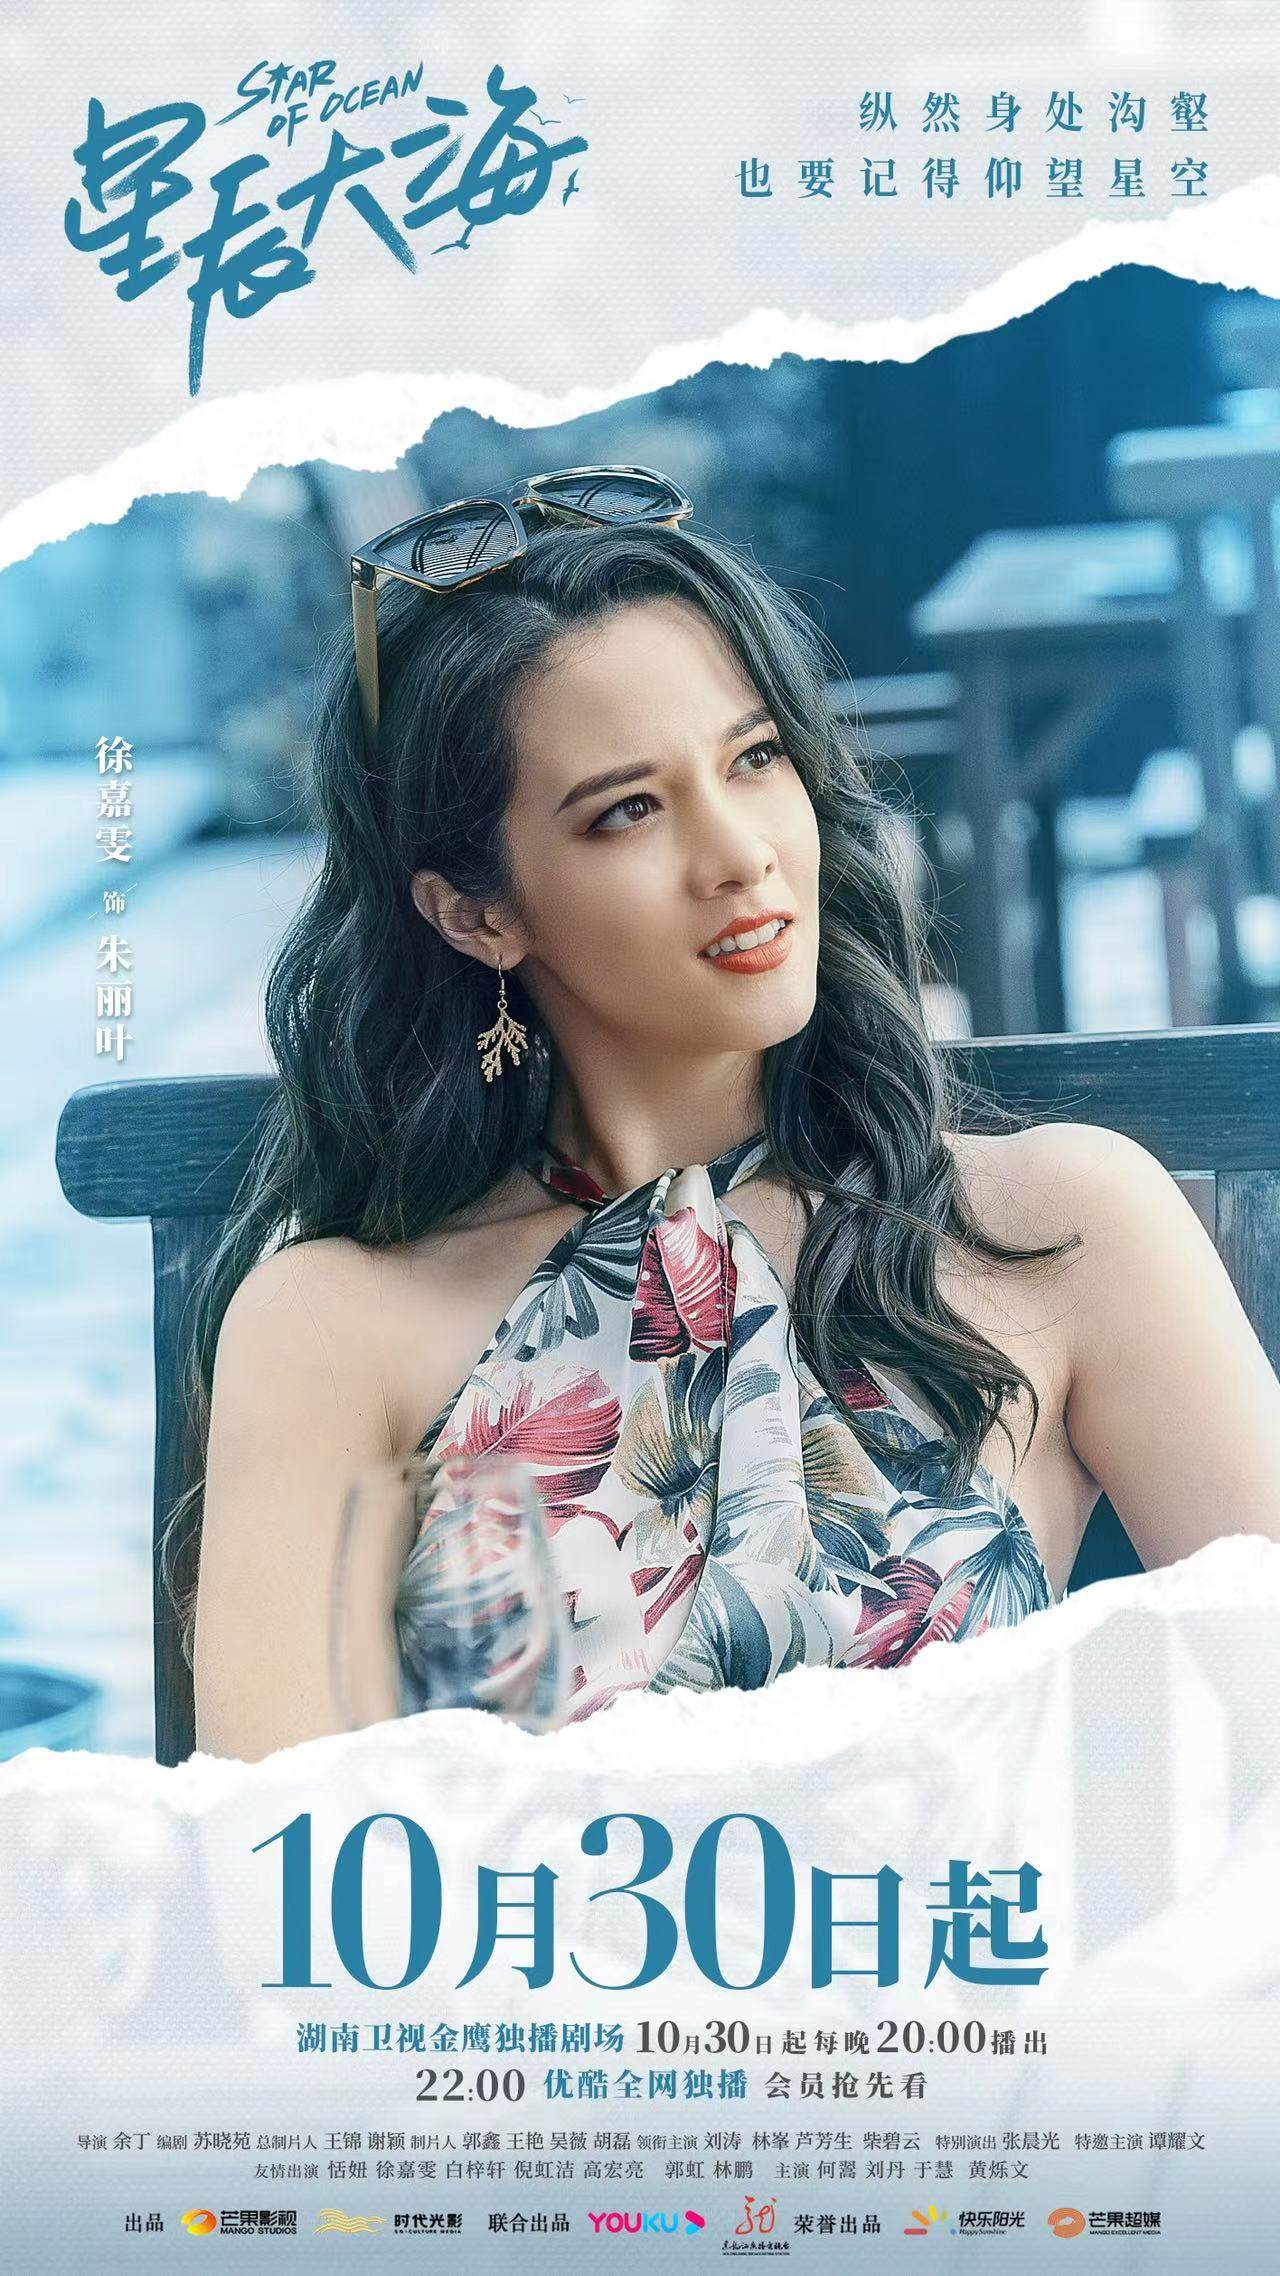 A documentary about Paris Hilton shaped the way emerging New Zealand-Chinese actress Augusta Xu-Holland approached her role as a model in hit Chinese series Star of Ocean.